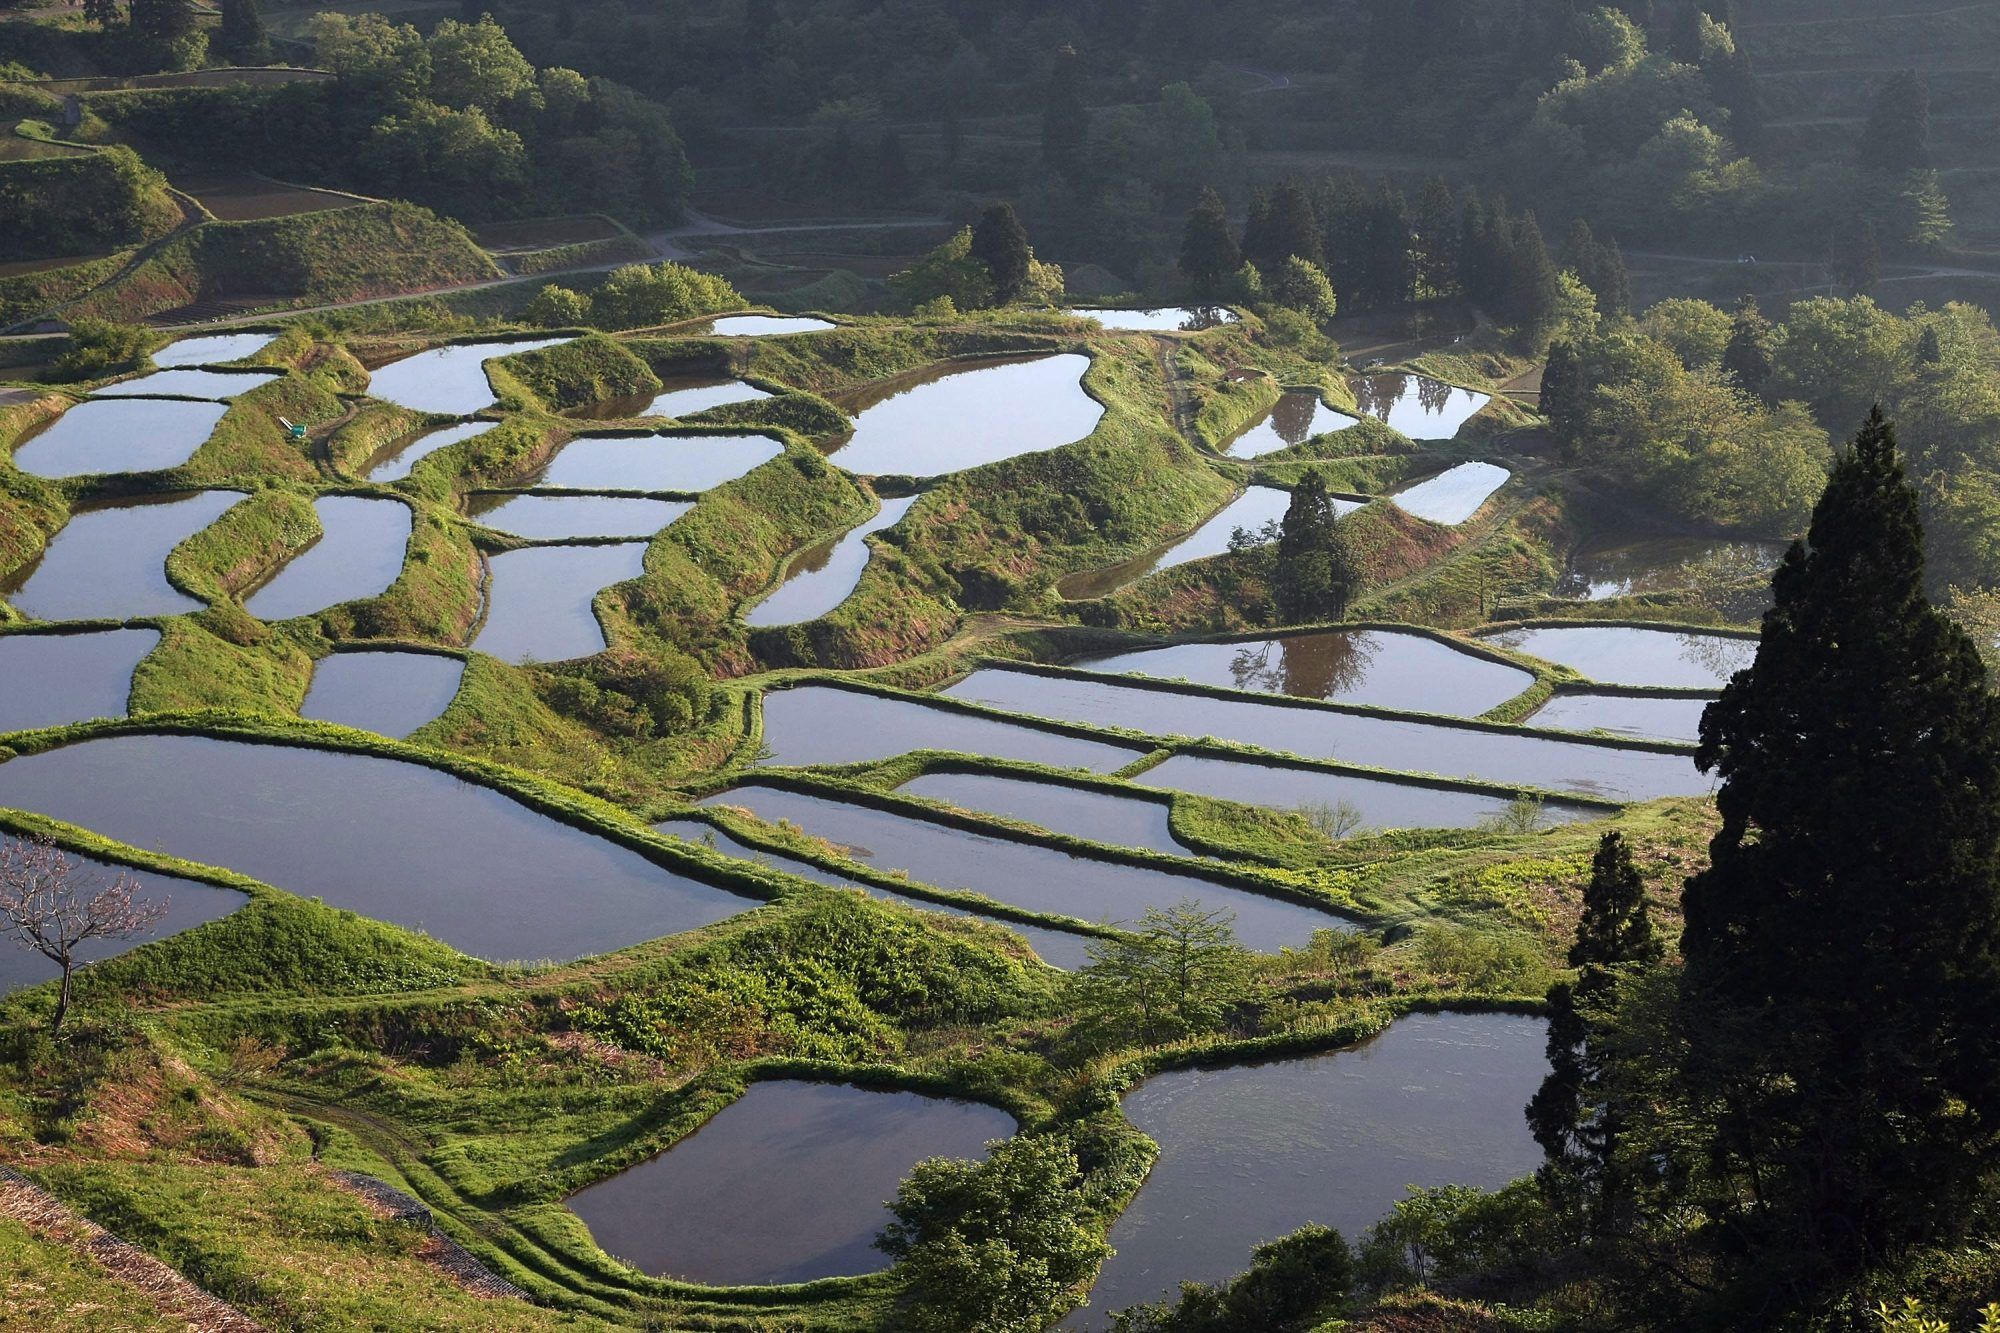 Niigata is renowned as one of Japan's best rice-growing area, ranking second amongst all the prefectures in terms of rice production.